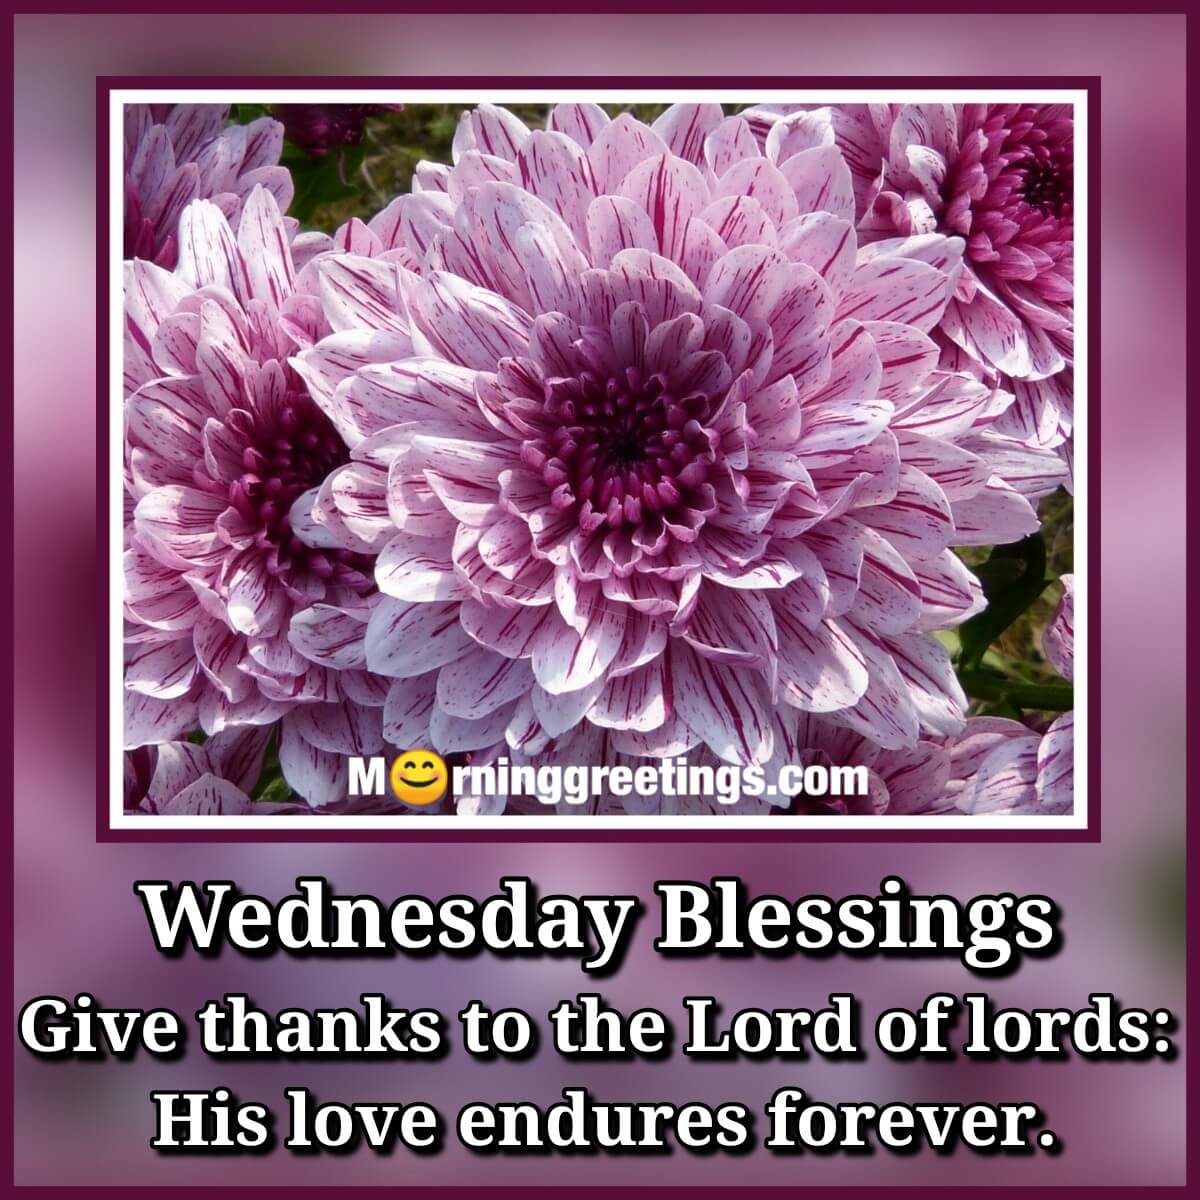 Wednesday Blessings Give Thanks To Lords Of Lords